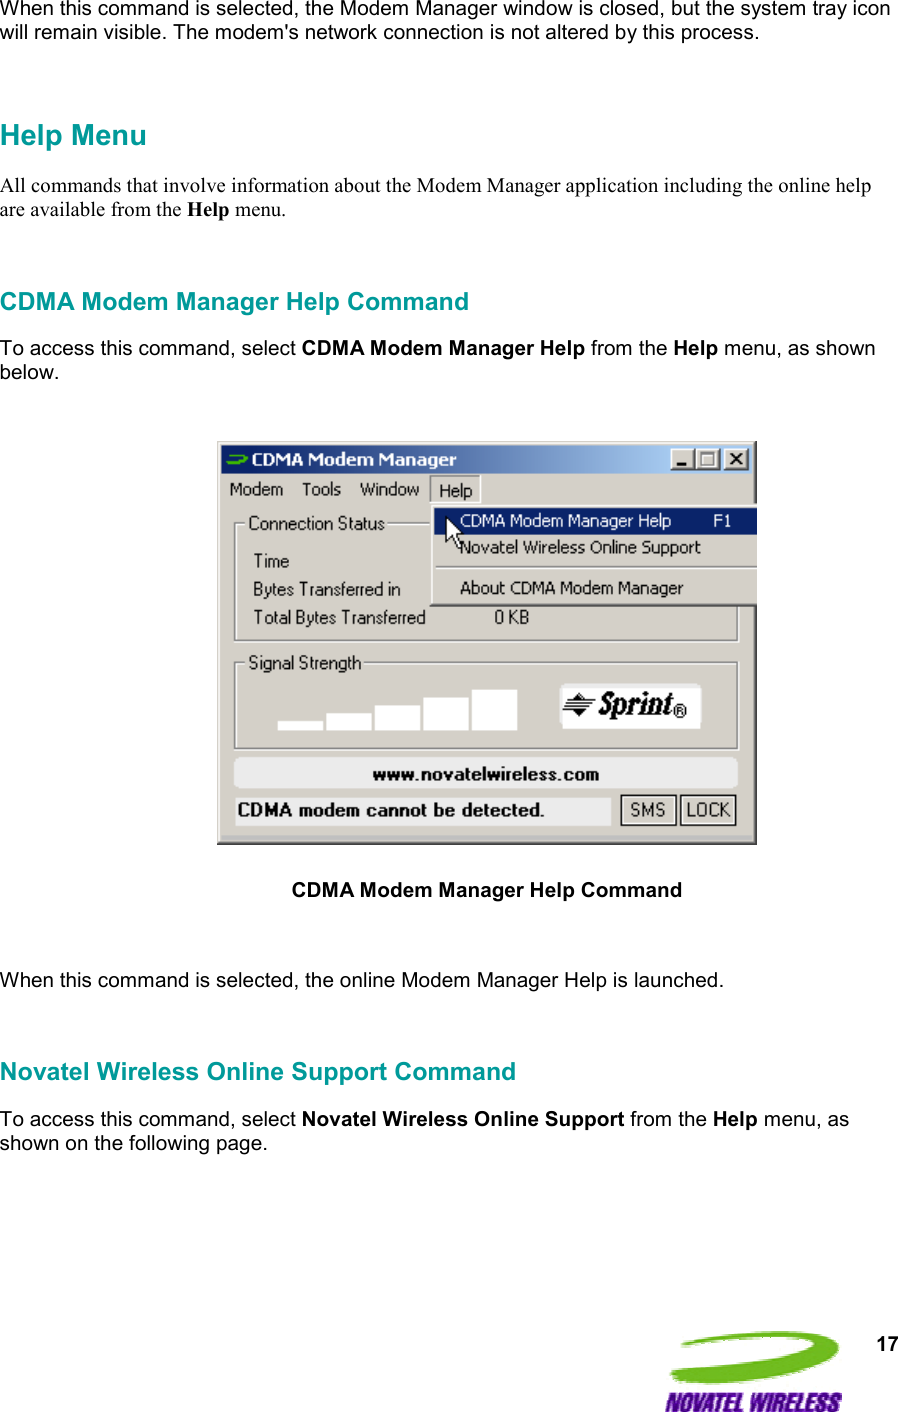  17 When this command is selected, the Modem Manager window is closed, but the system tray icon will remain visible. The modem&apos;s network connection is not altered by this process.  Help Menu All commands that involve information about the Modem Manager application including the online help are available from the Help menu.  CDMA Modem Manager Help Command To access this command, select CDMA Modem Manager Help from the Help menu, as shown below.    CDMA Modem Manager Help Command  When this command is selected, the online Modem Manager Help is launched.   Novatel Wireless Online Support Command To access this command, select Novatel Wireless Online Support from the Help menu, as shown on the following page.  